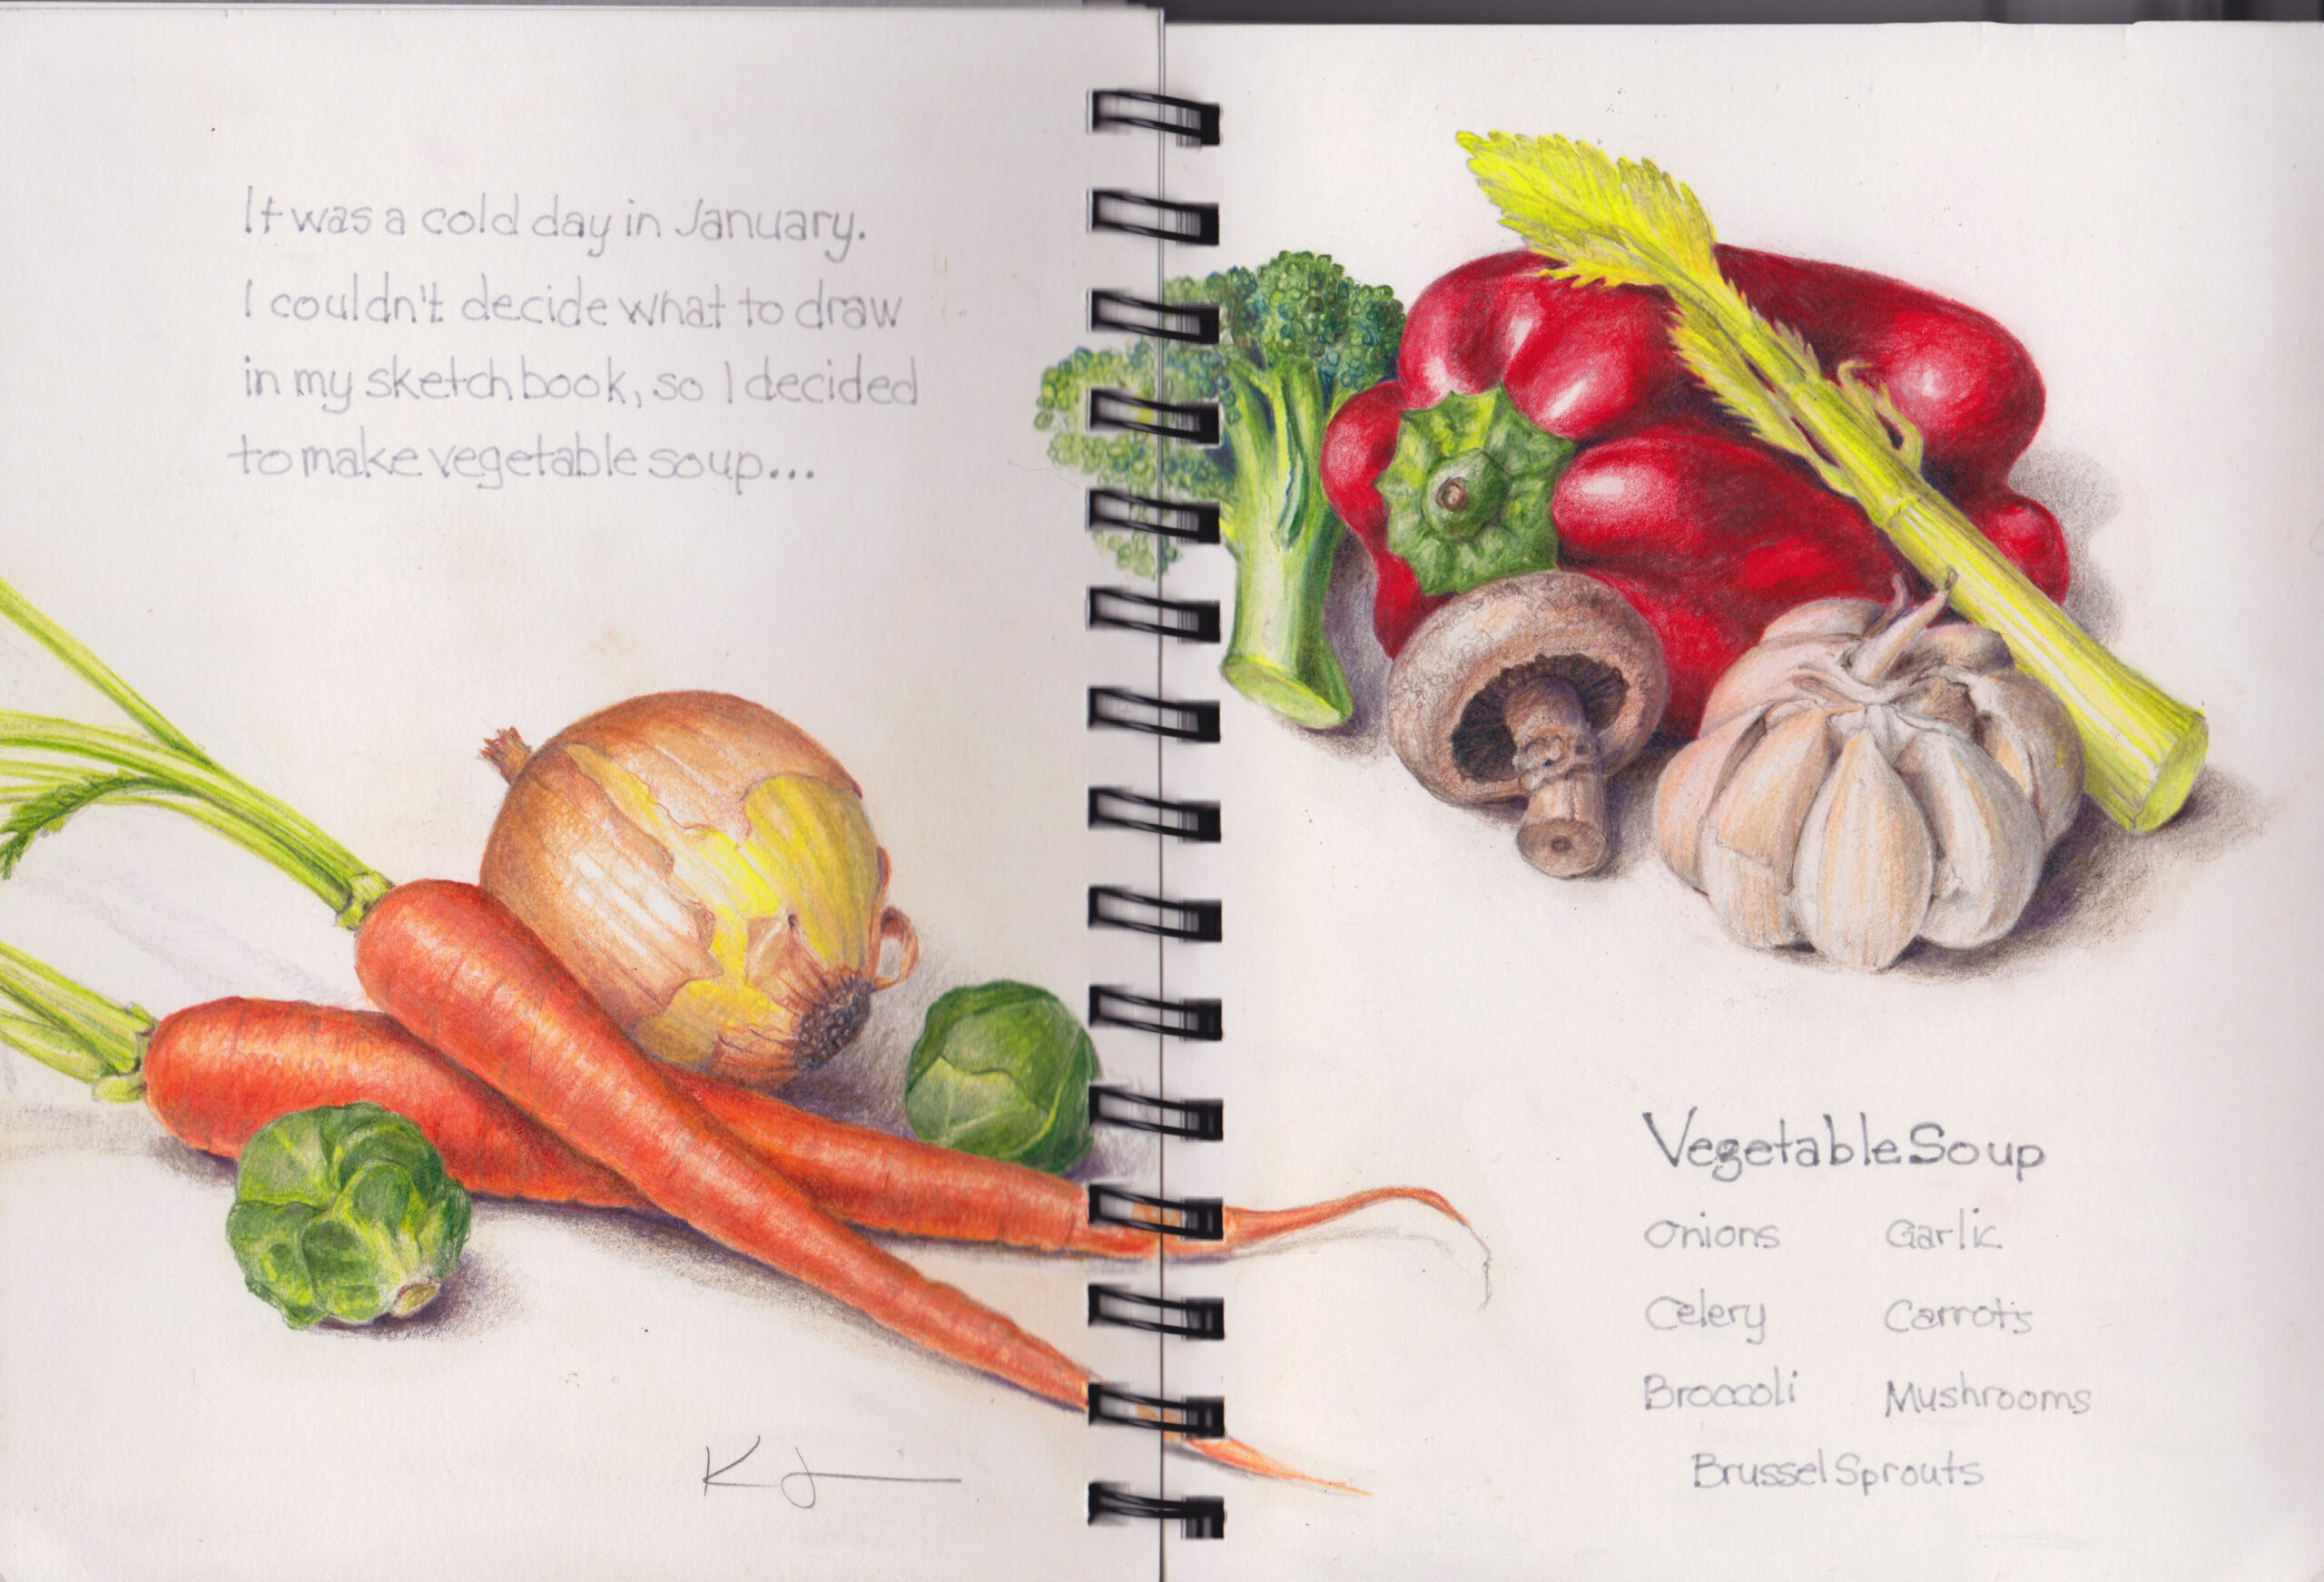 Vegetables for soup by Katy Lyness